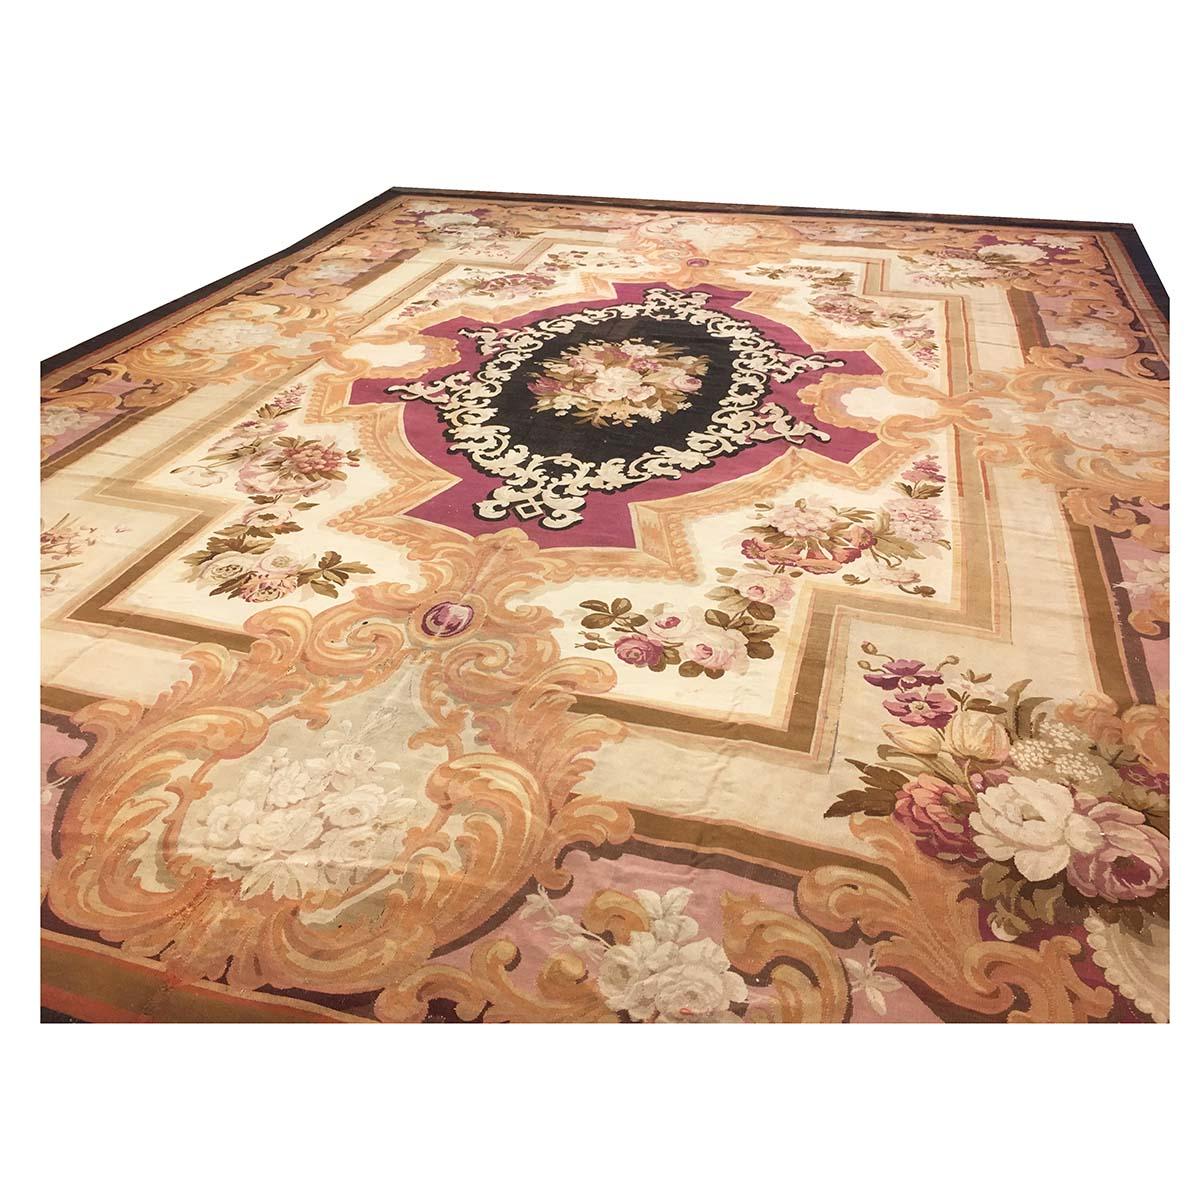 19th Century 14x17 French Aubusson Tapestry Rug #9902078 In Fair Condition For Sale In Houston, TX